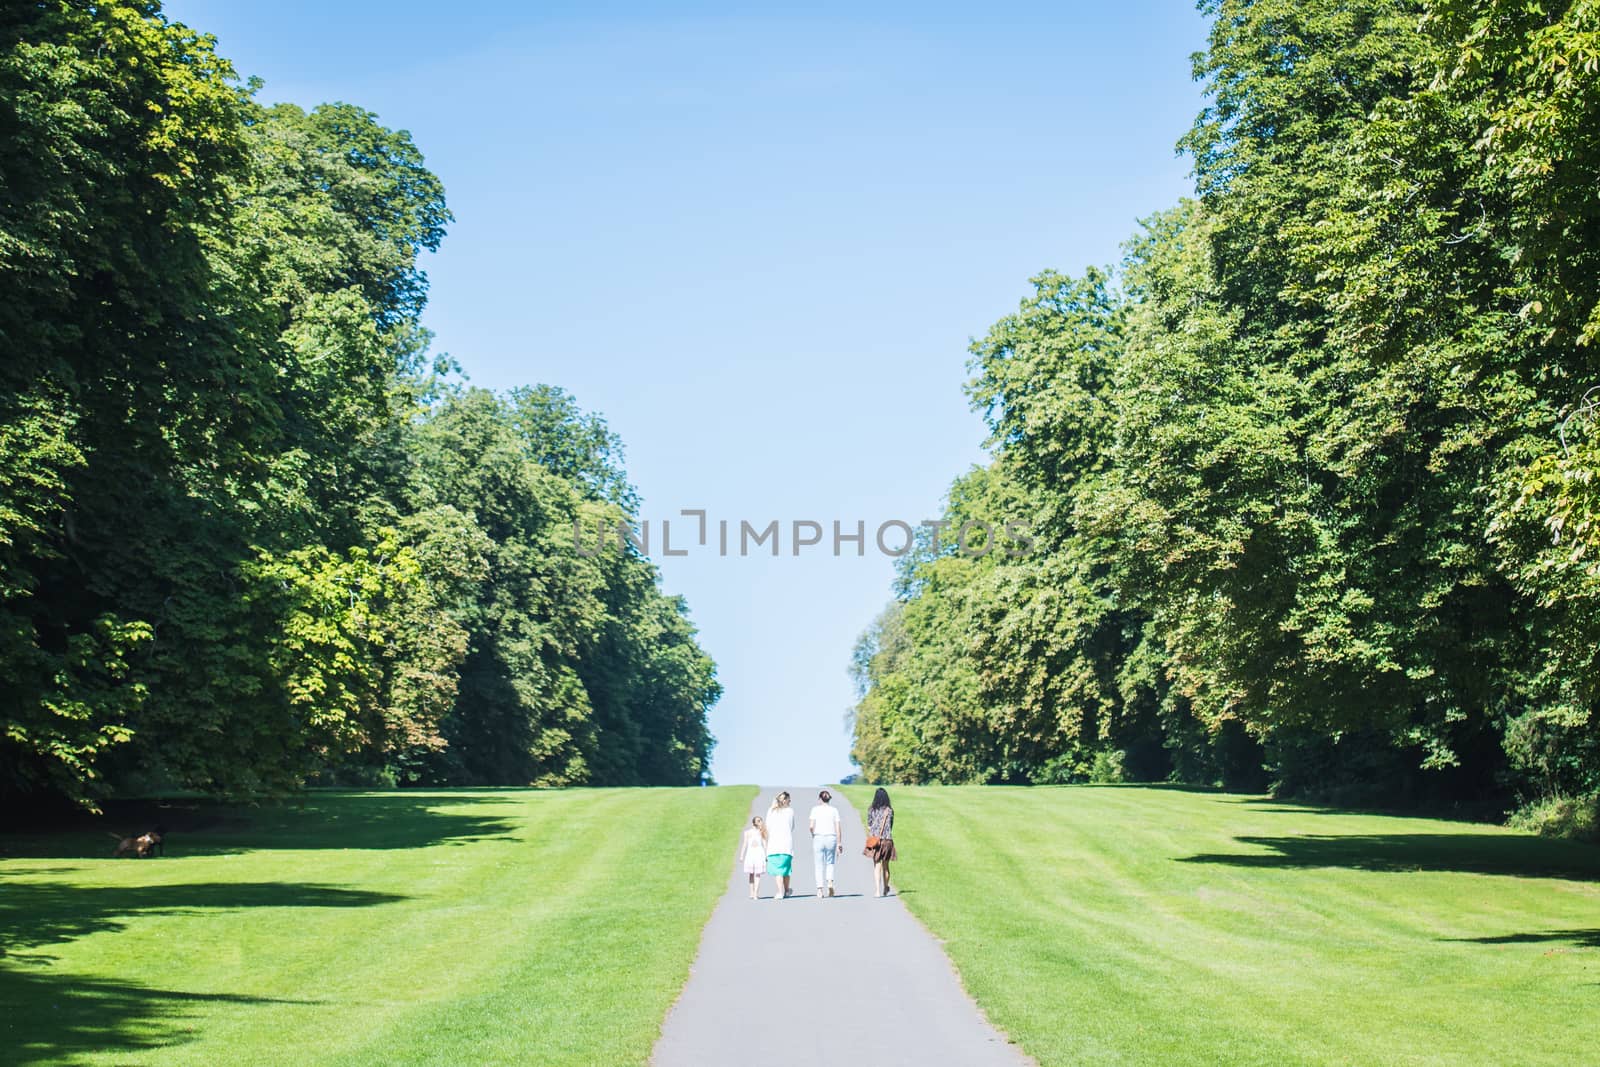 Family Walk together at Cirencester park in summer by paddythegolfer